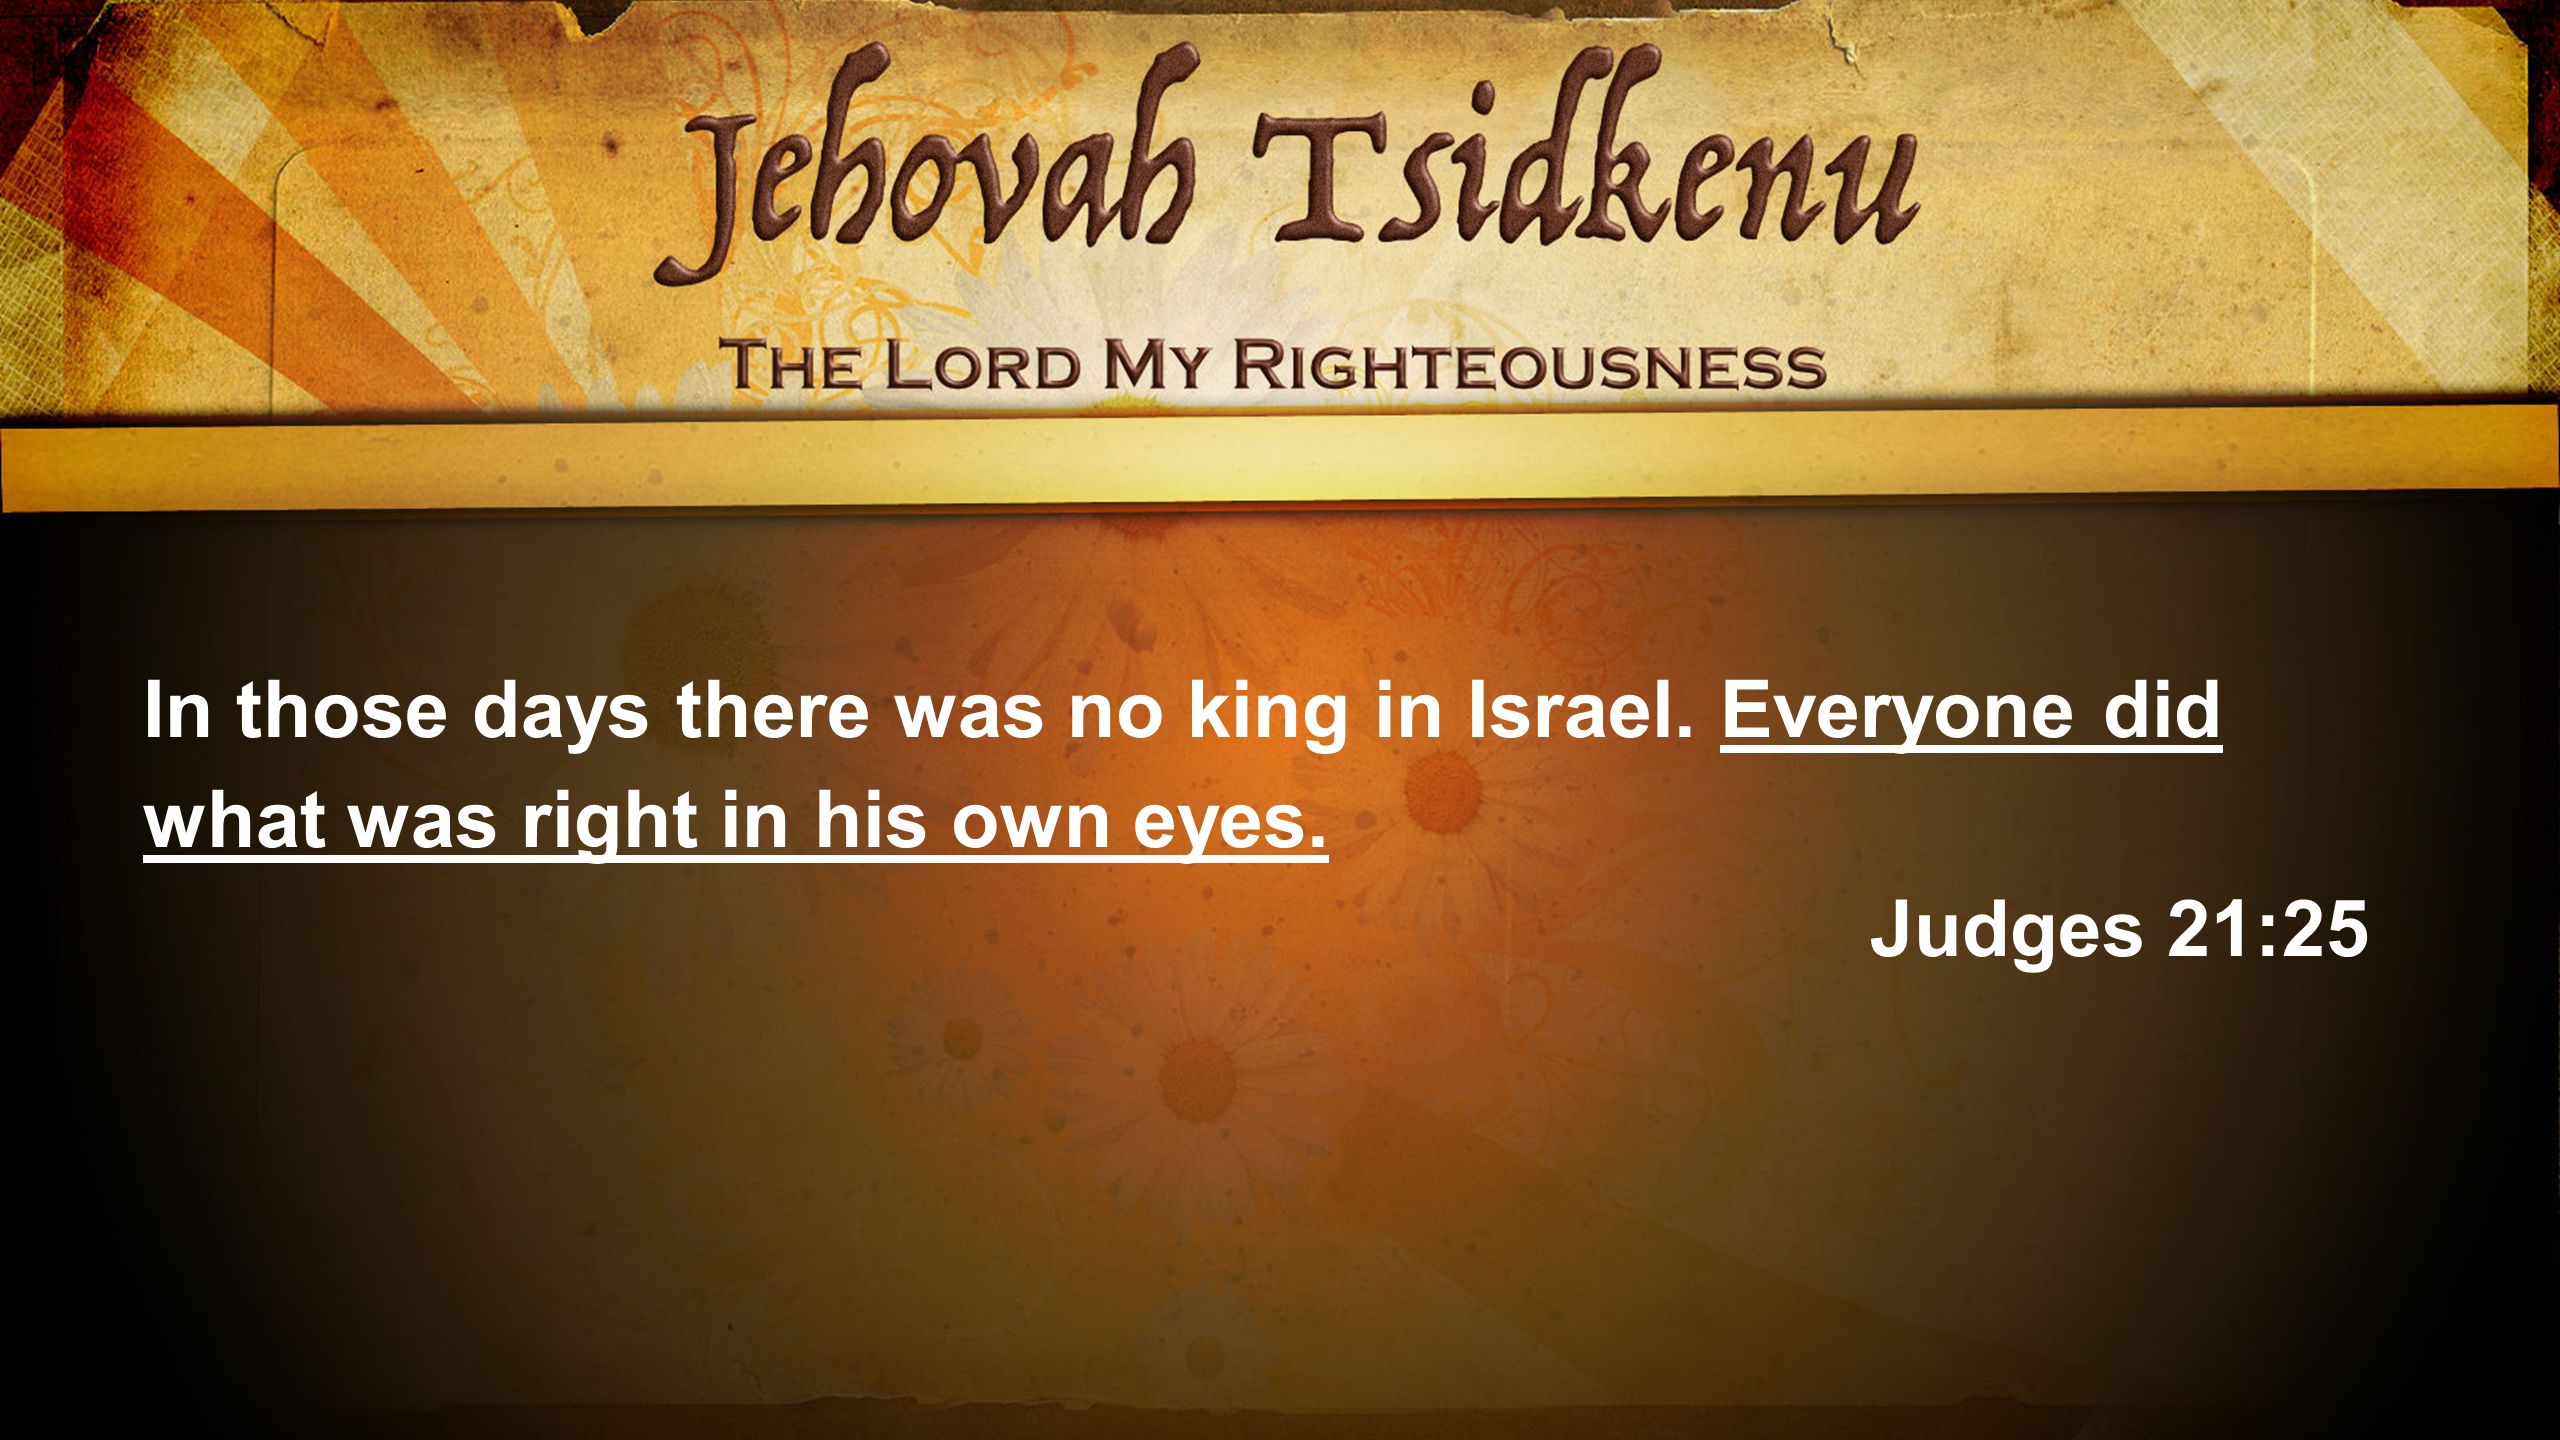 In those days there was no king in Israel. Everyone did what was right in his own eyes.